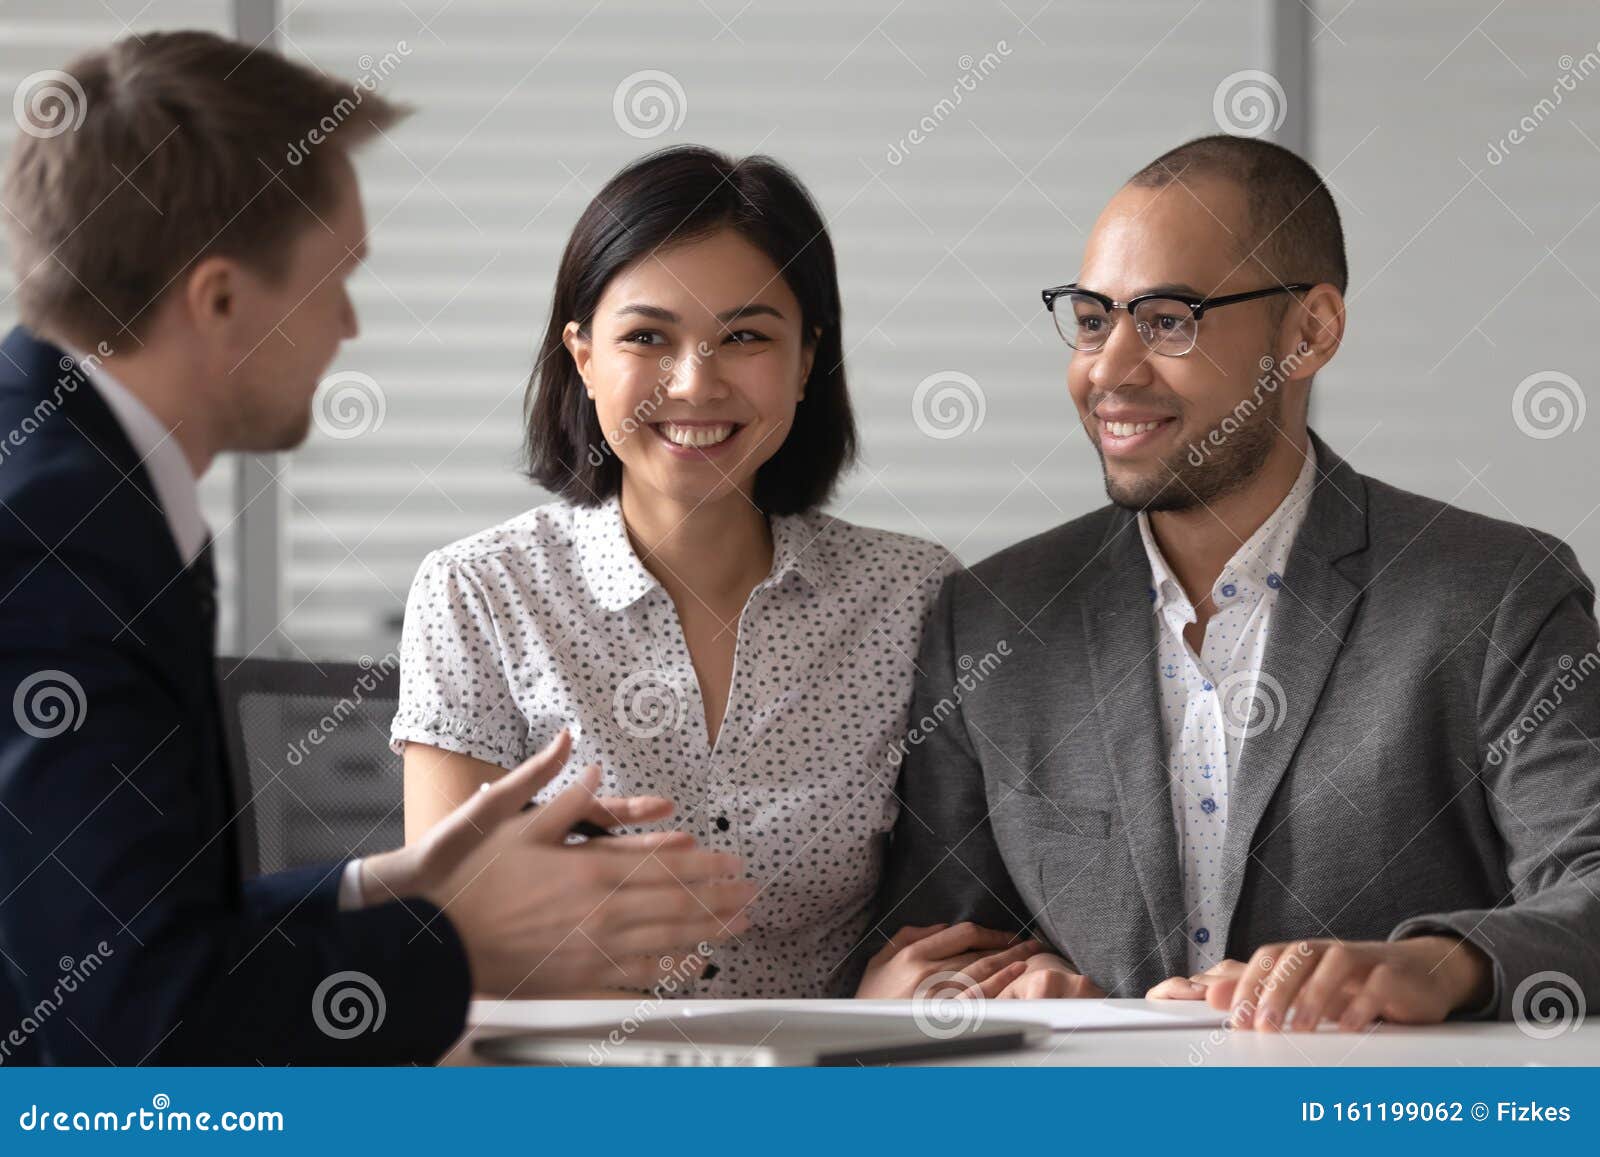 manager realtor banker consulting happy diverse young couple at meeting